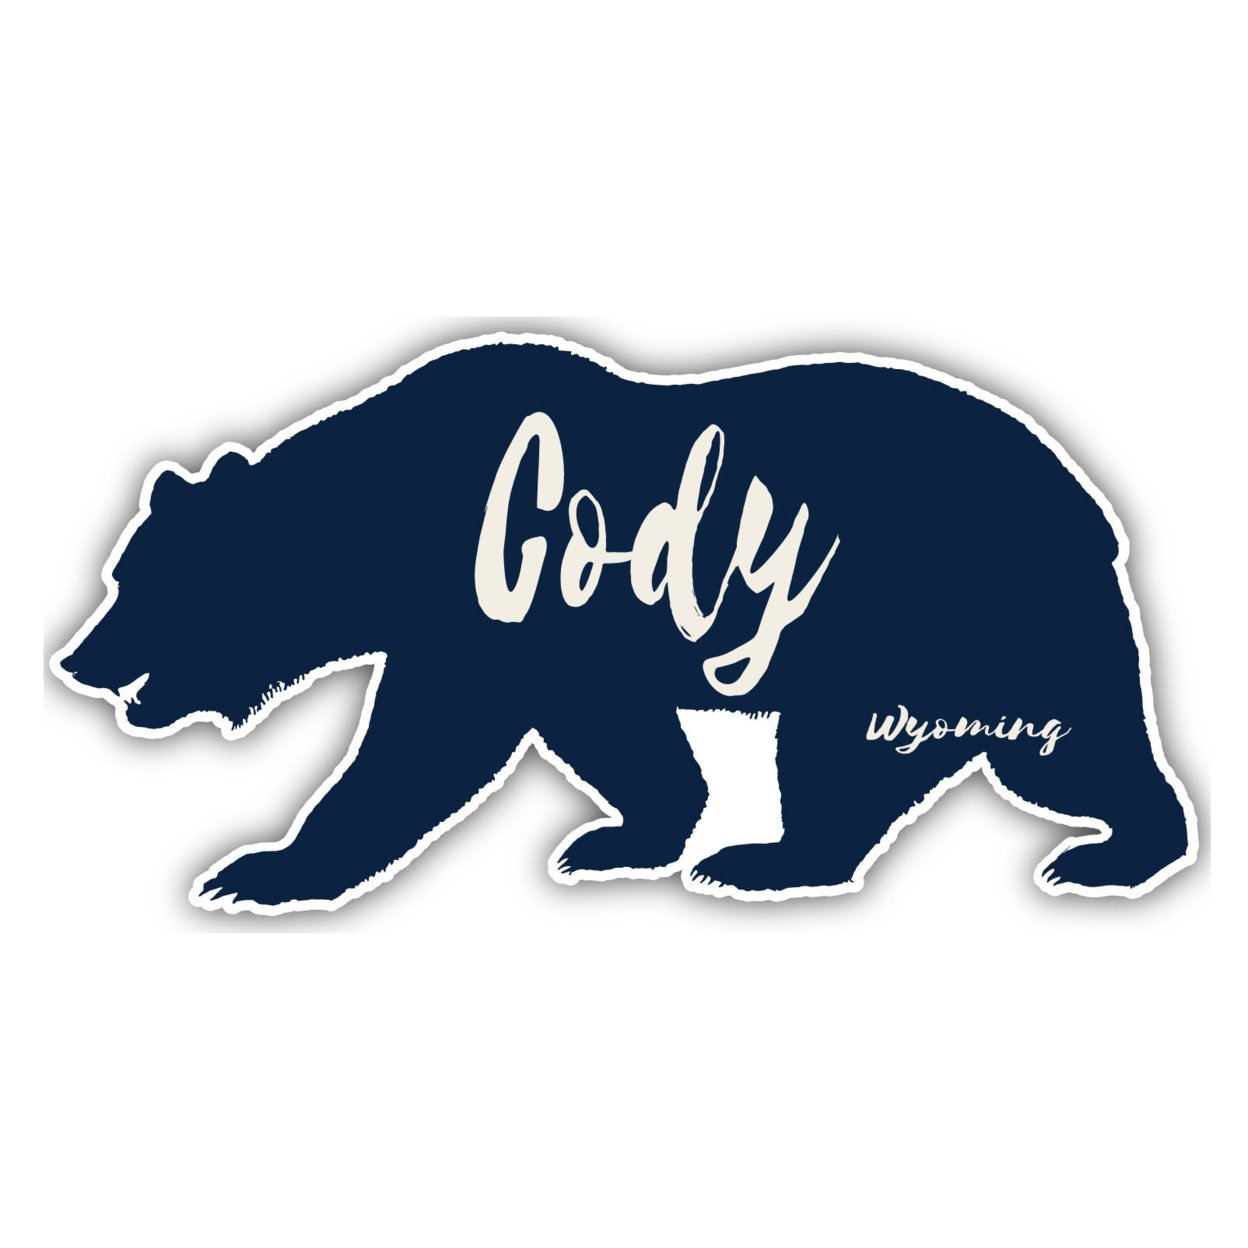 Cody Wyoming Souvenir Decorative Stickers (Choose Theme And Size) - 4-Pack, 4-Inch, Bear